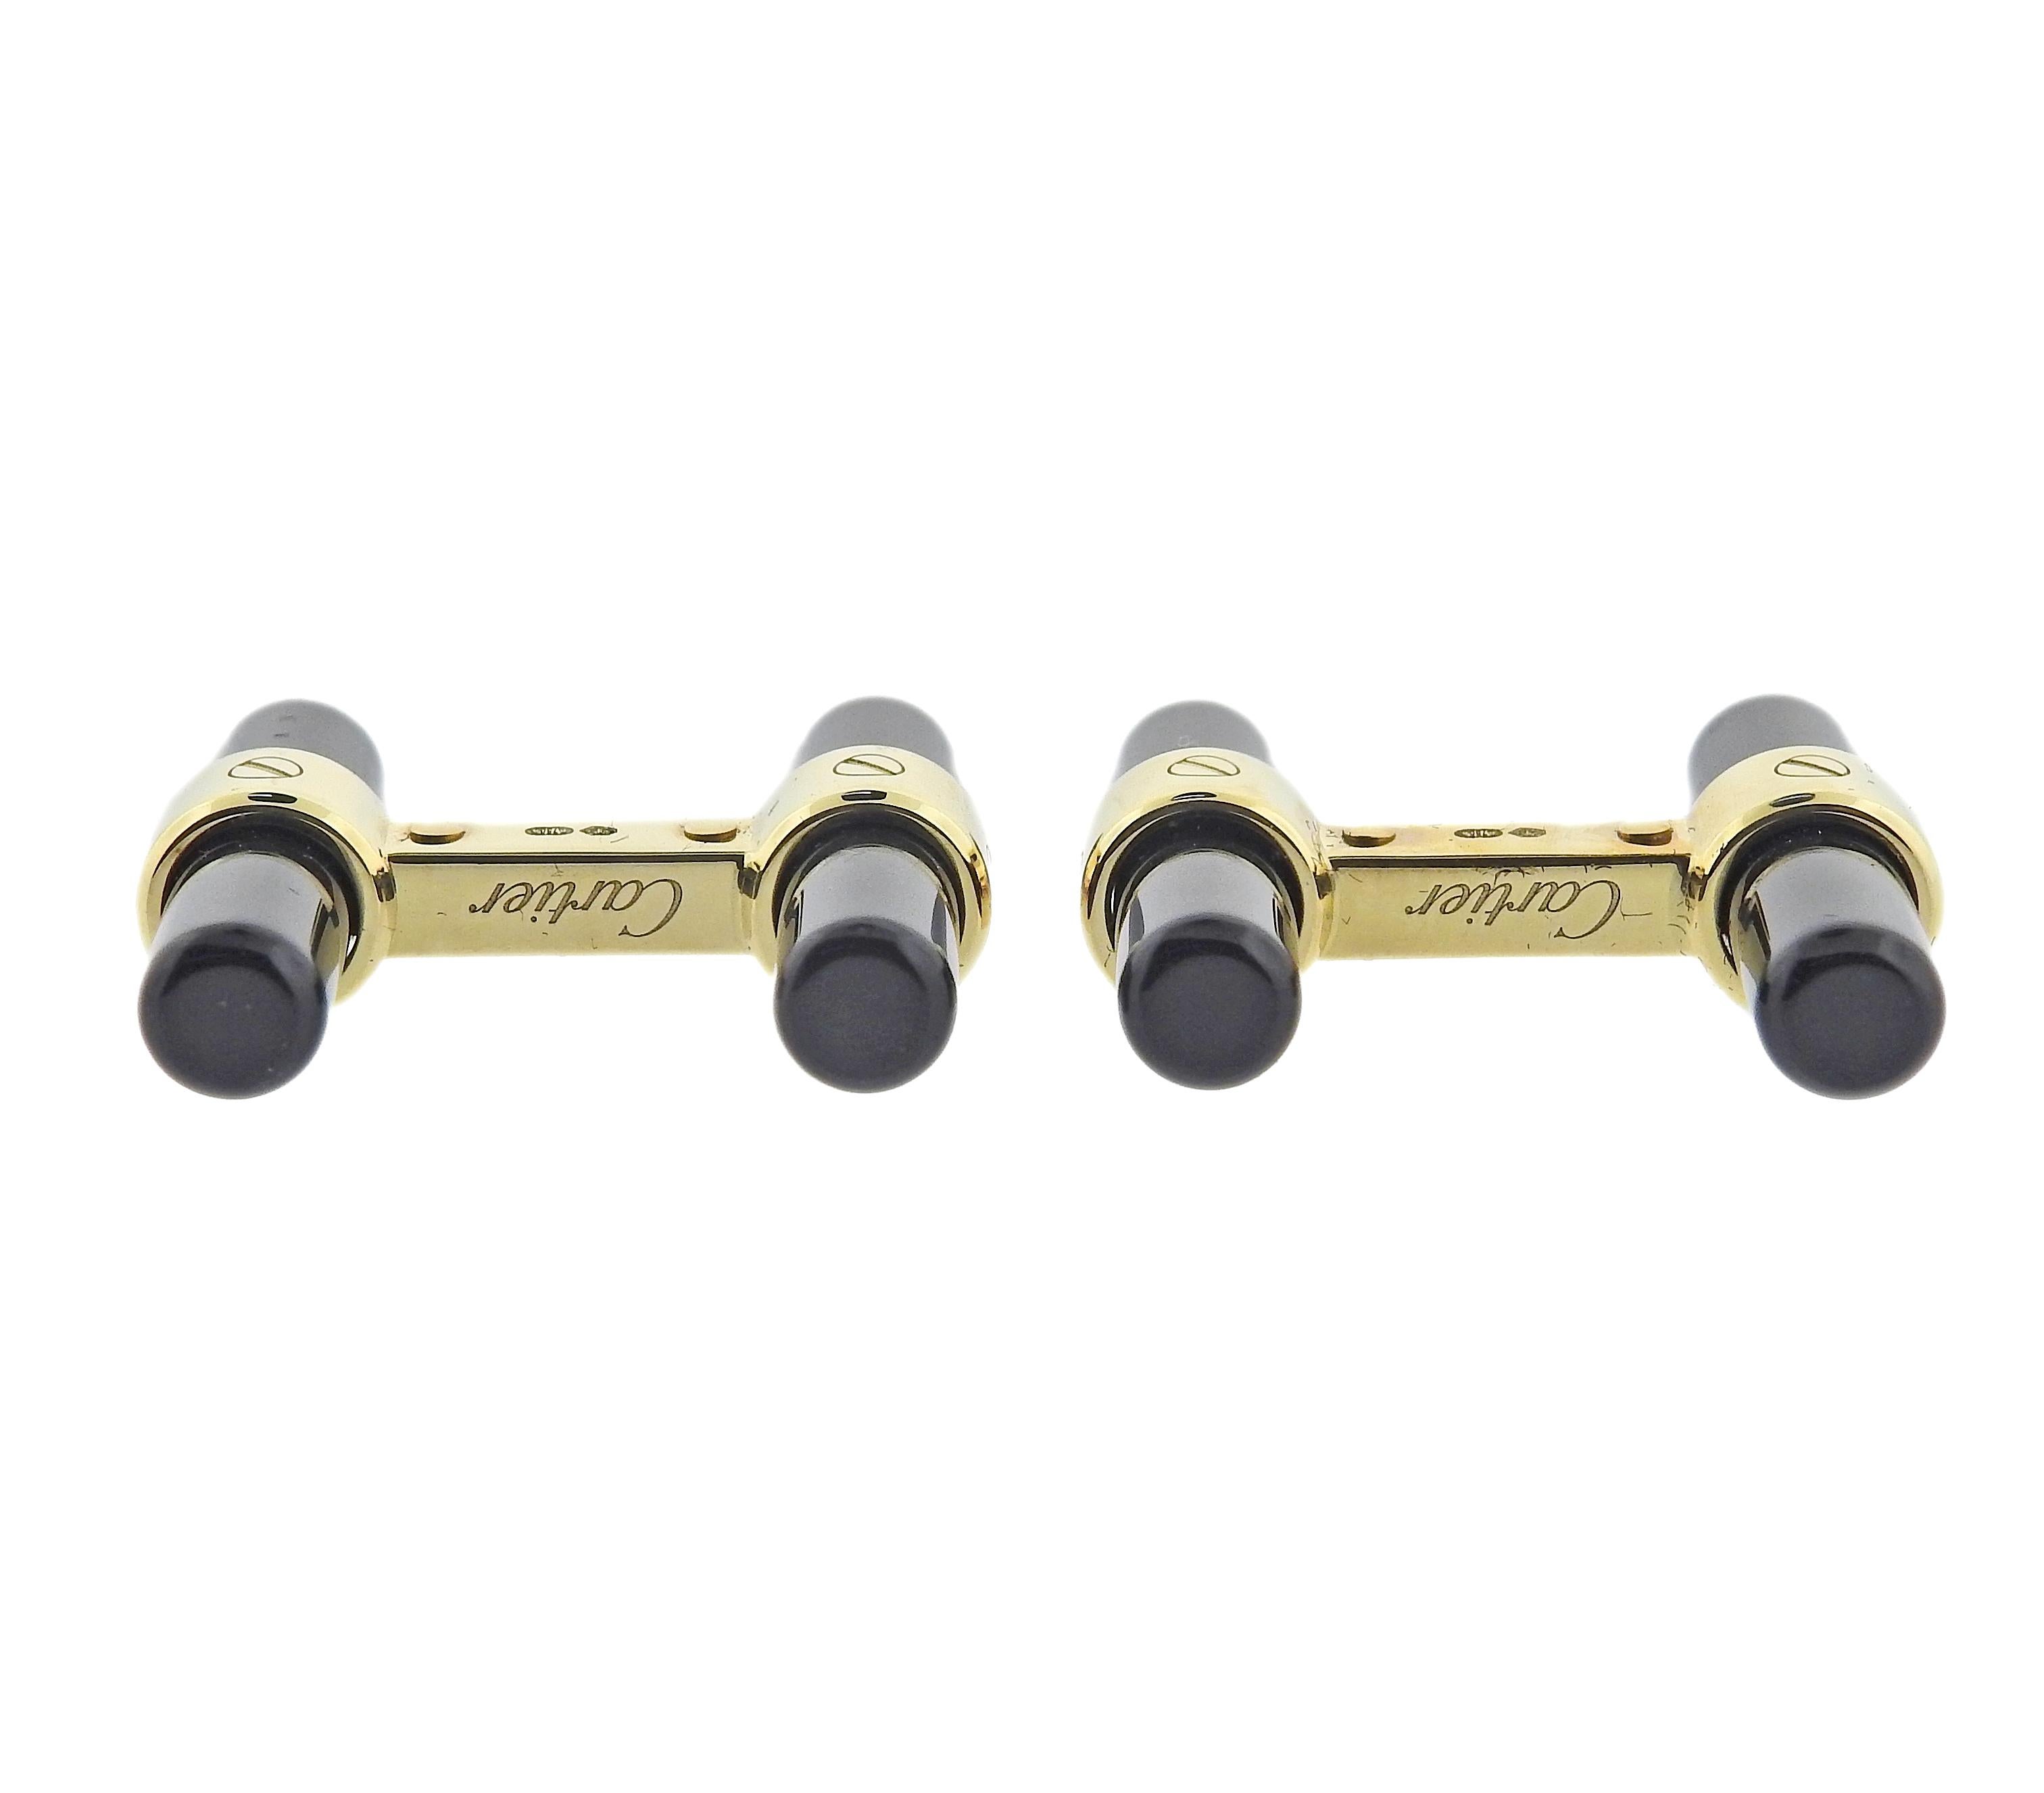 Pair of Cartier interchangeable bar cufflinks in 18K yellow gold with onyx, lapis, rhodochrosite, jade. Cufflinks measure 23mm x 5mm. Marked: Cartier, made in France, A5073, Au750. Weight is 11.5 grams.